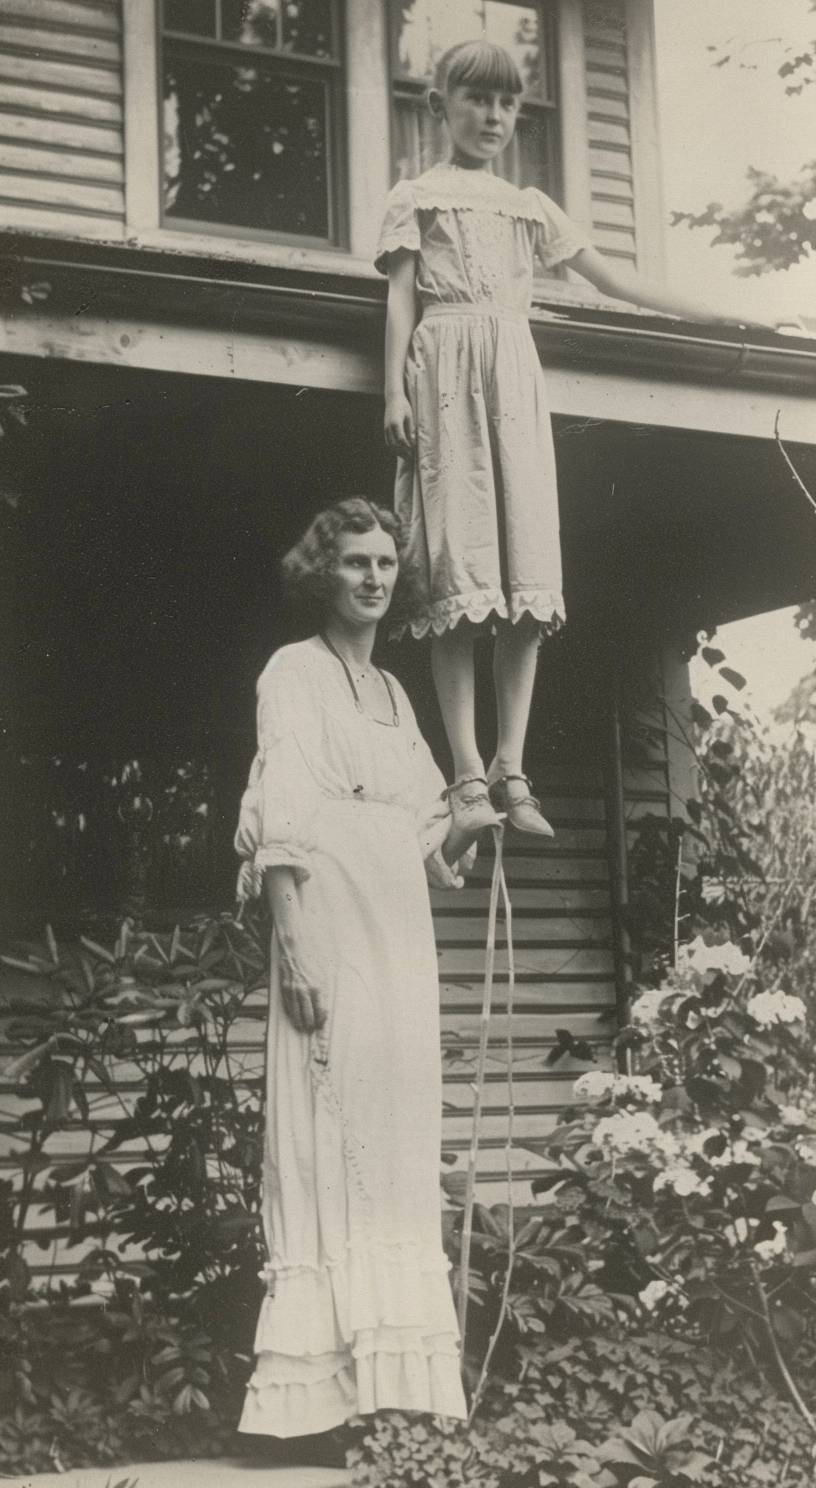 A vintage photo of the long legs and stilt-like feet of an extremely tall woman, holding up her shorthaired daughter with one hand, standing in the front yard of a house, taken in the 1920s, creating a creepy horror scene.